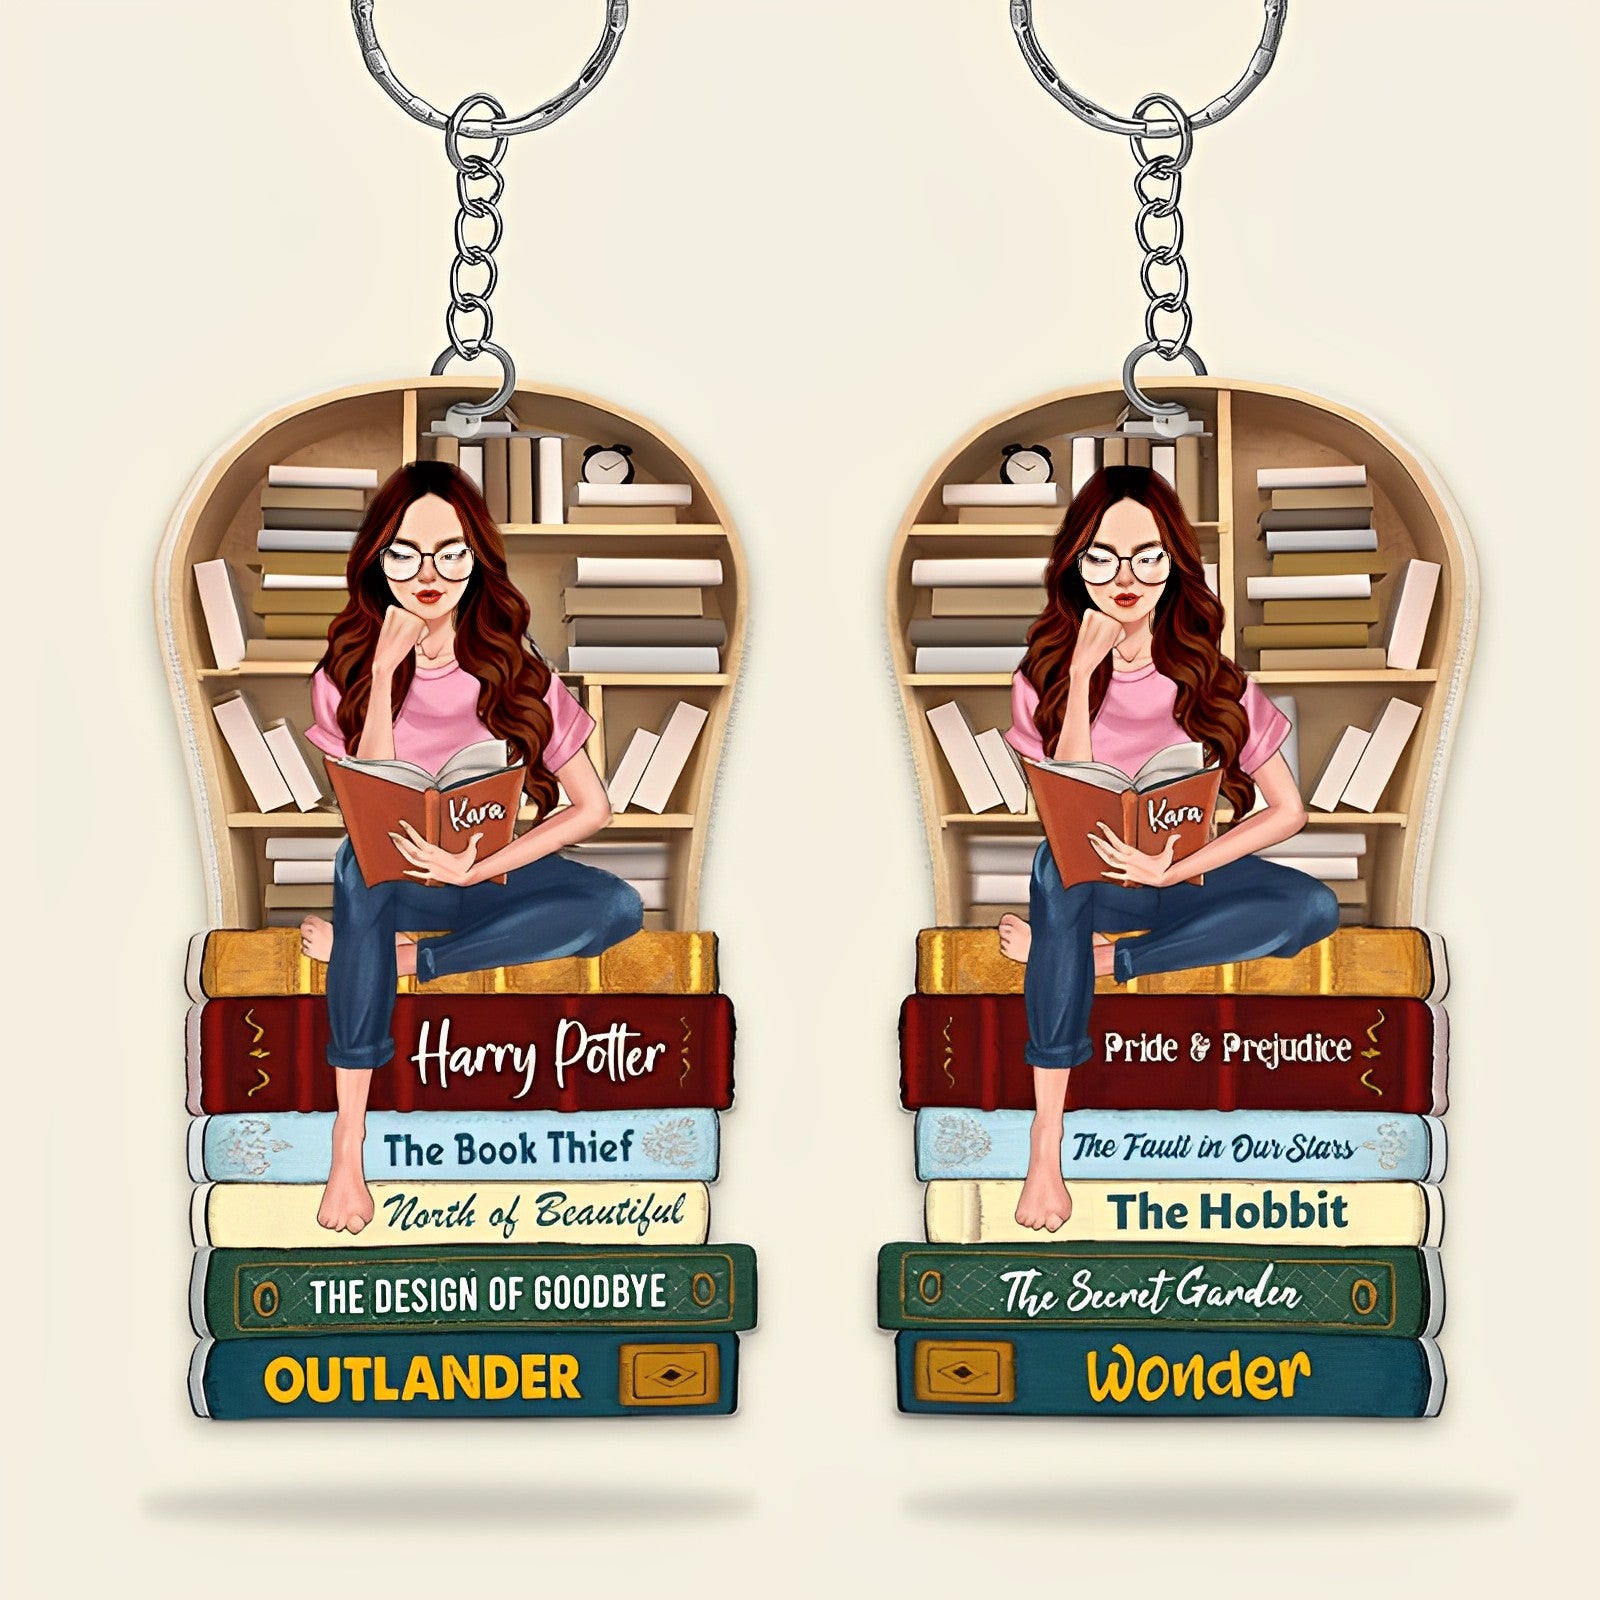 Reading Girl On Bookshelf, Personalized Keychain With Custom Book Titles